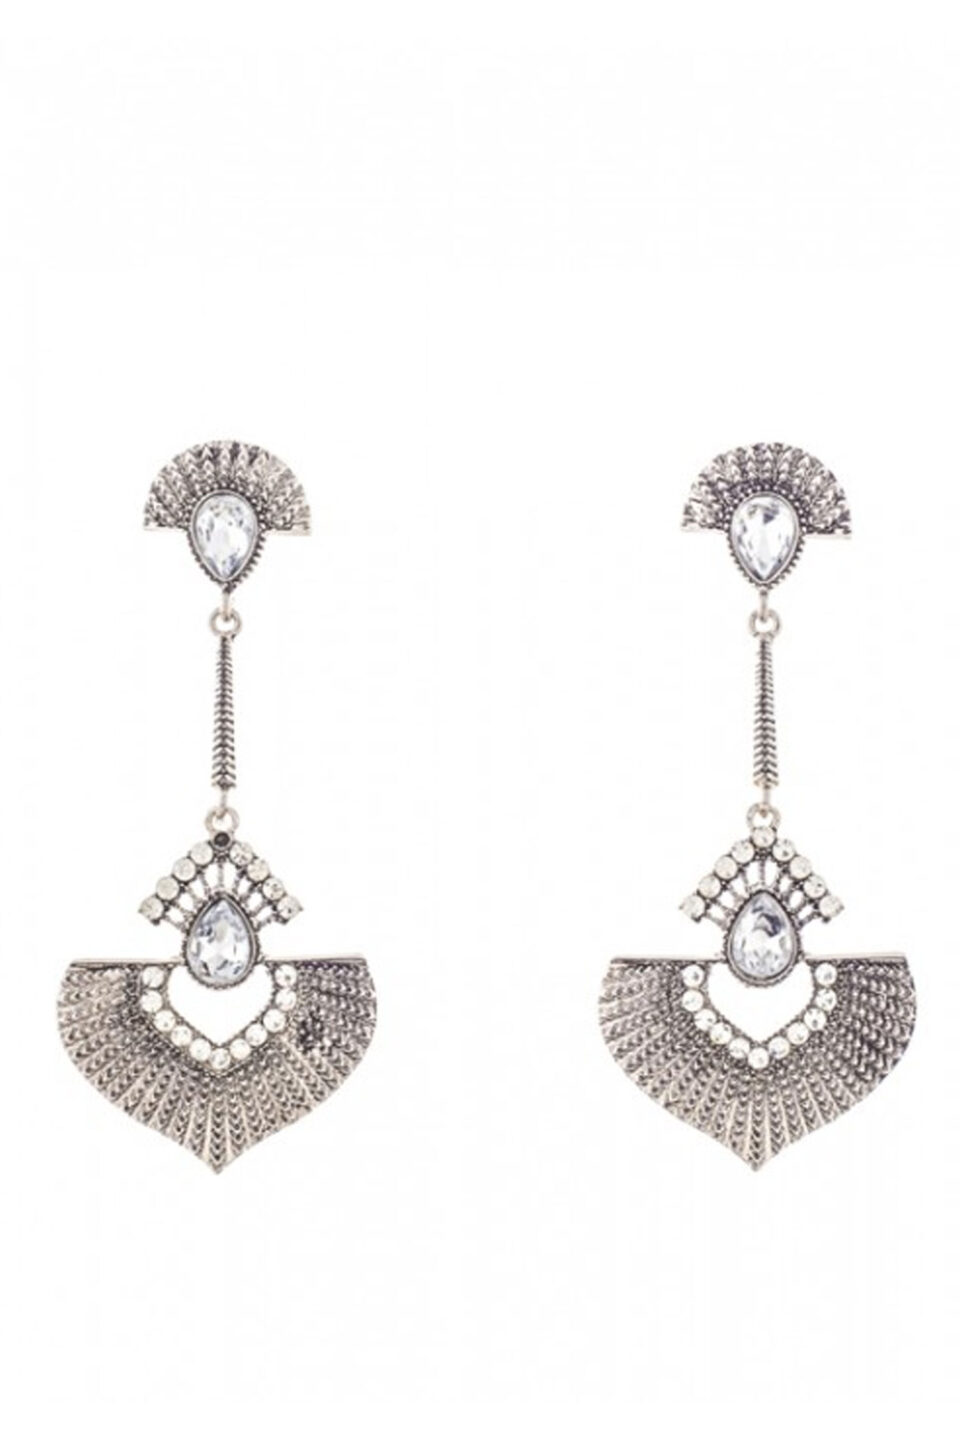 contemporary fashion earrings